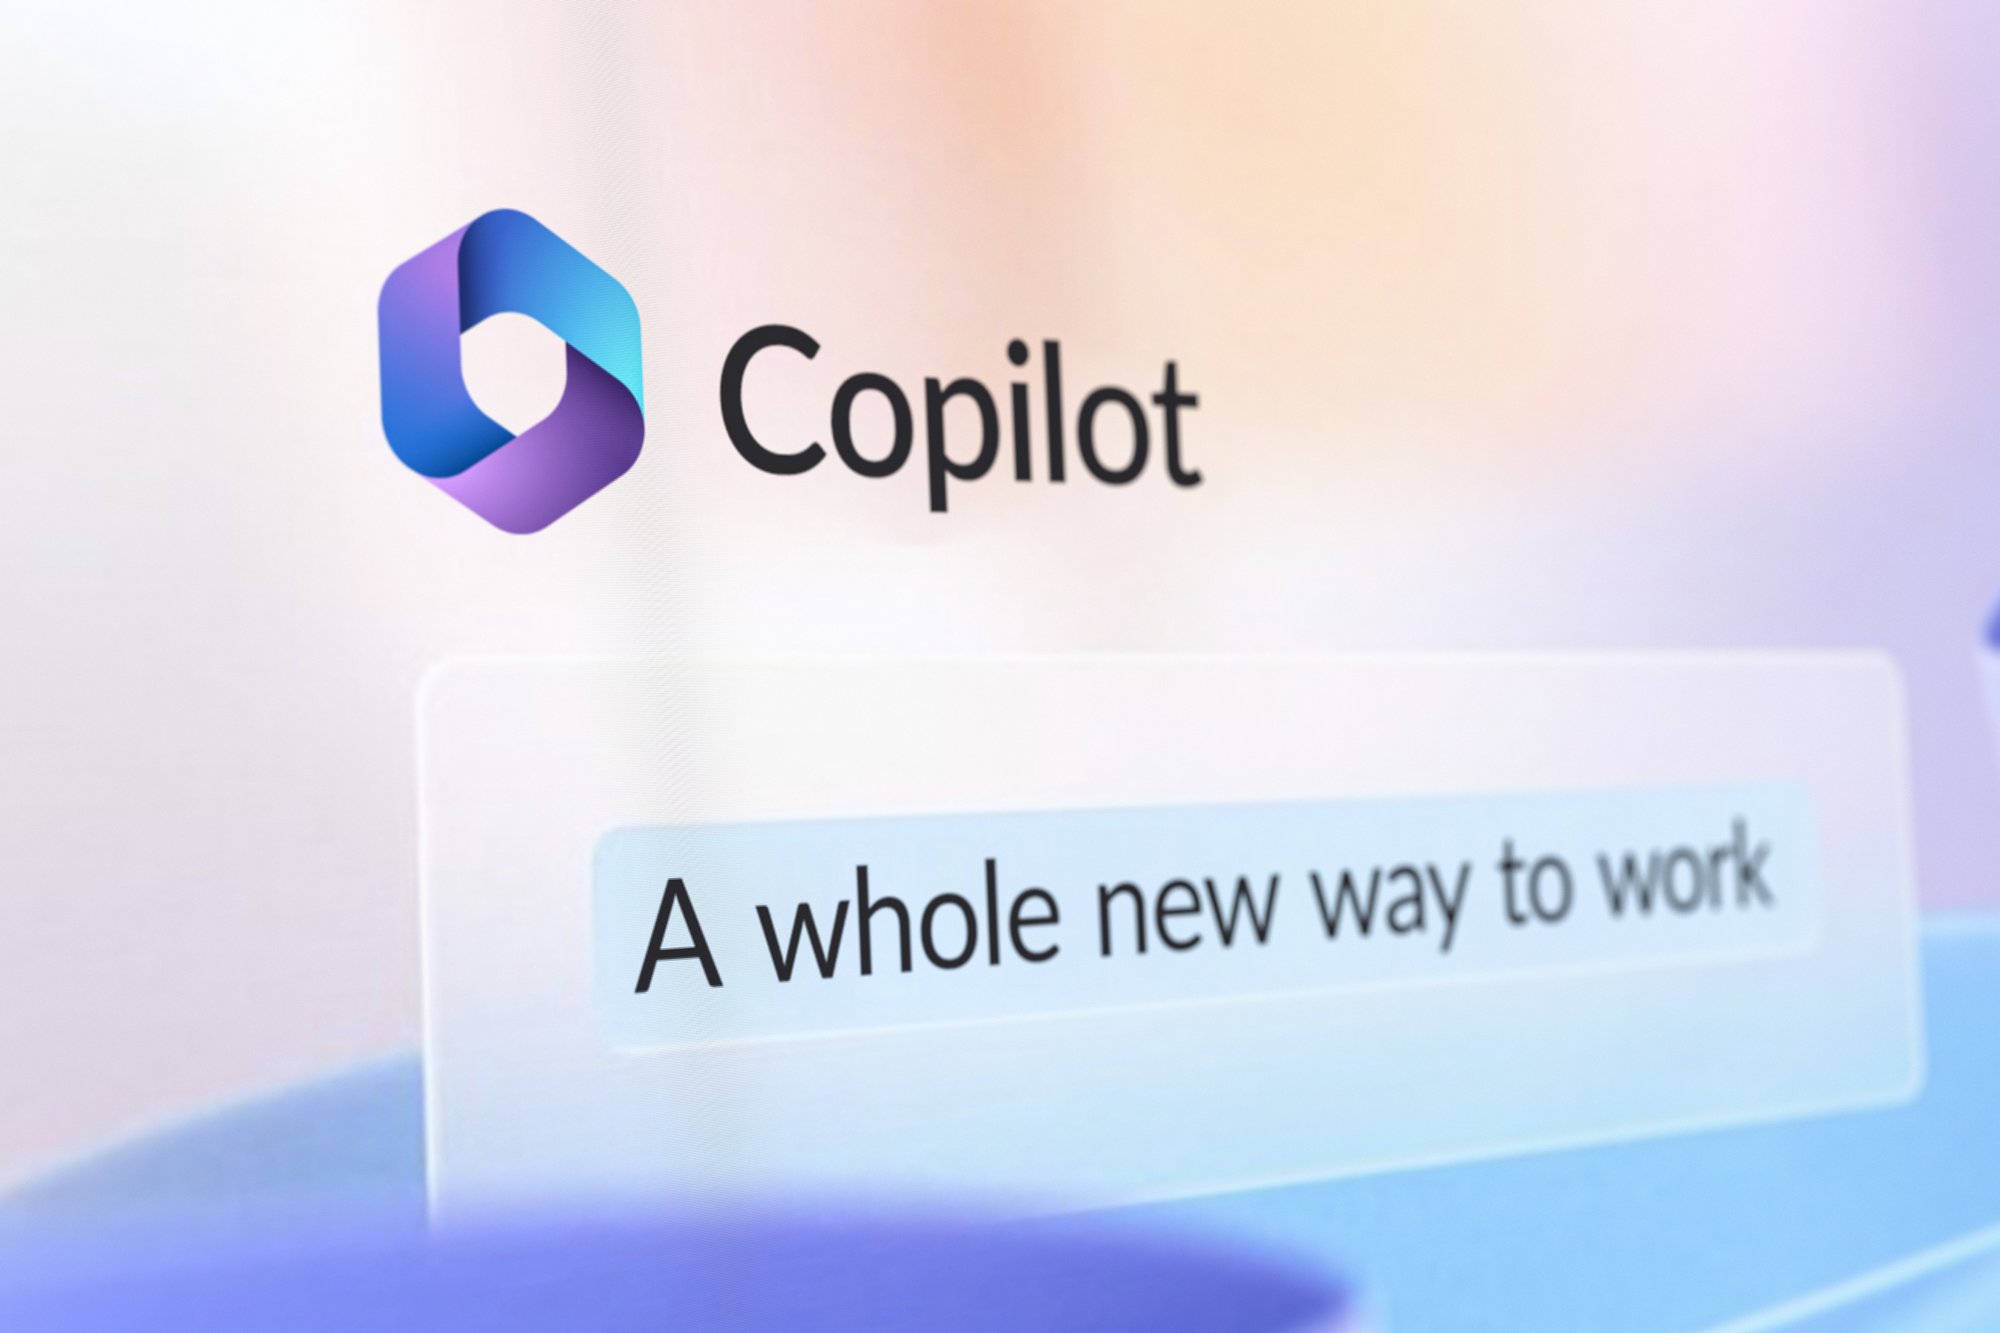 Copilot - a whole new way to work